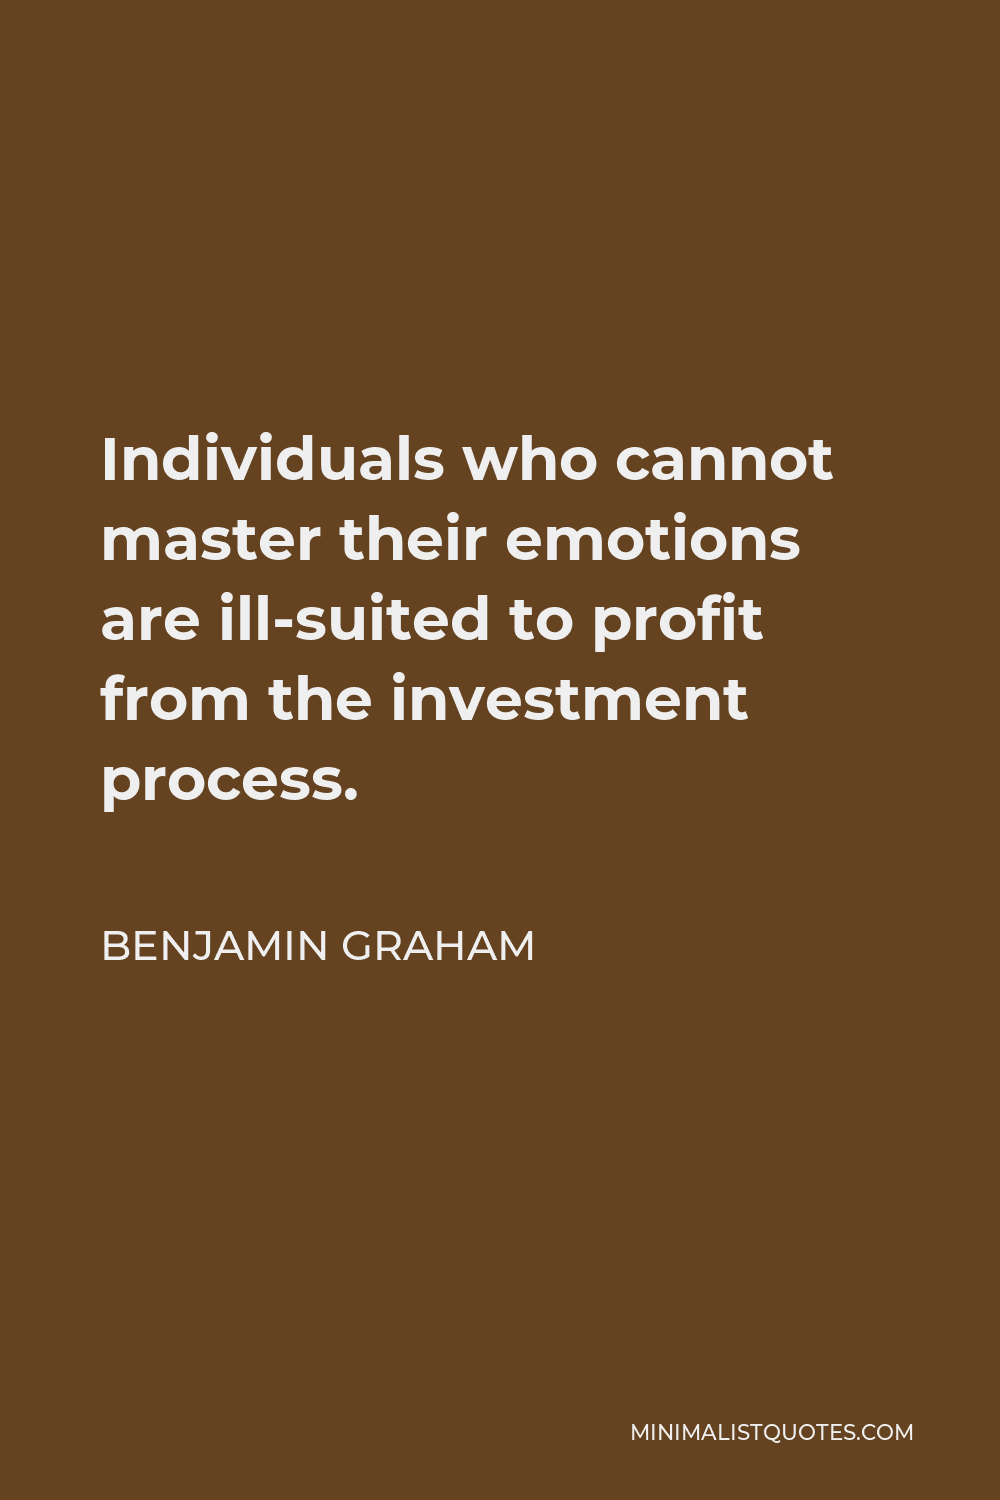 Benjamin Graham Quote - Individuals who cannot master their emotions are ill-suited to profit from the investment process.